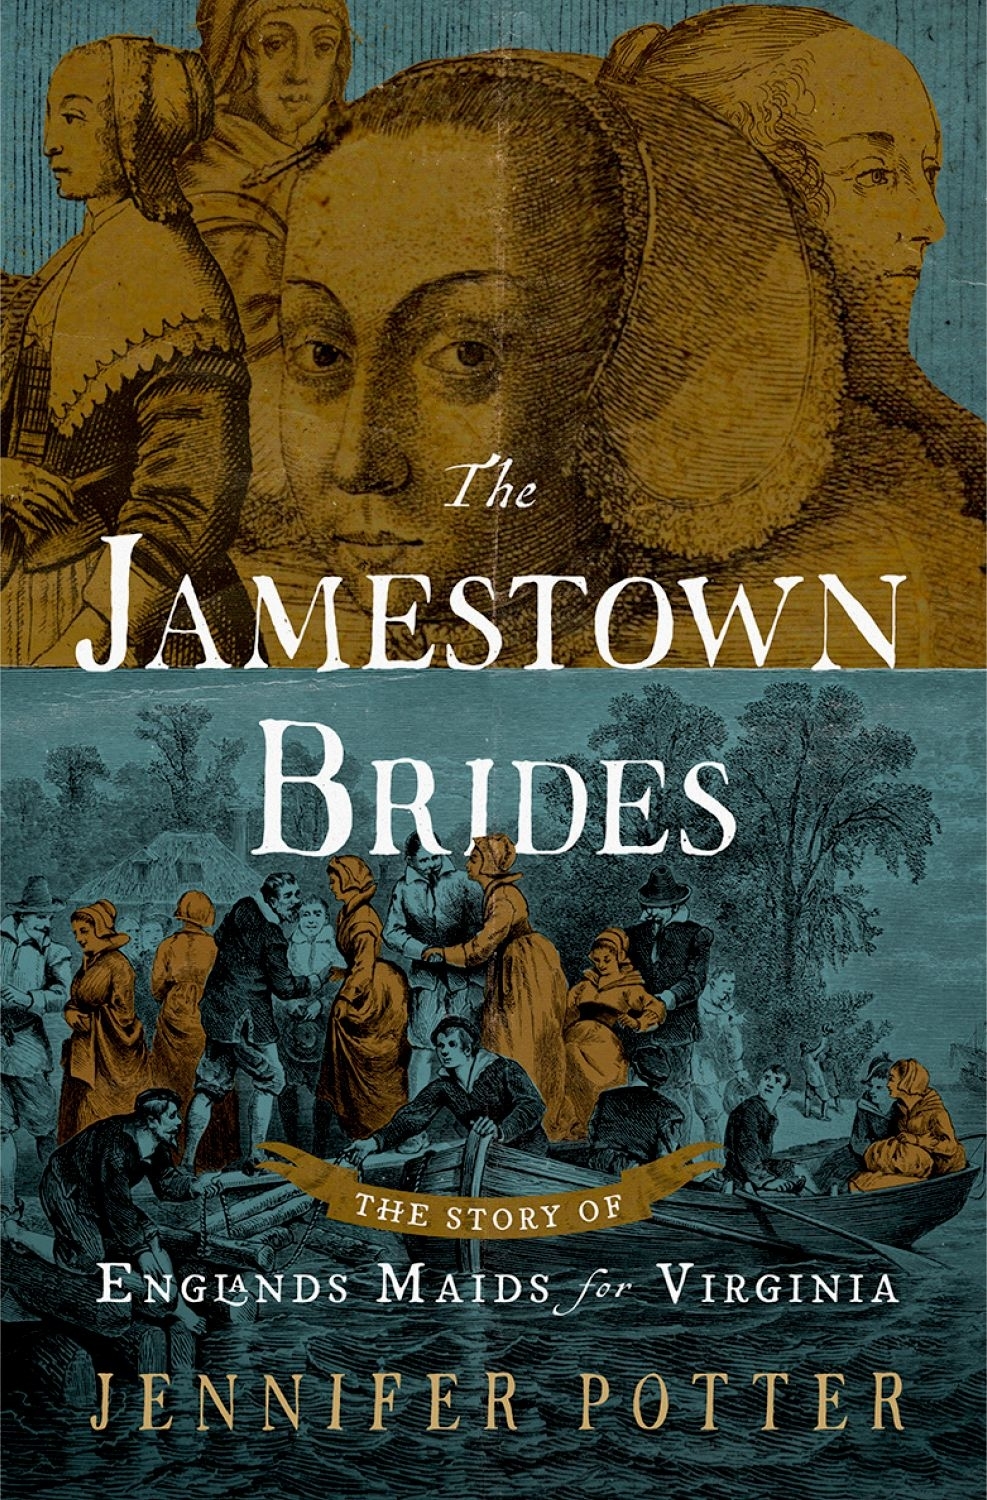 The Jamestown Brides The Story of Englands Maids for Virginia - image 1